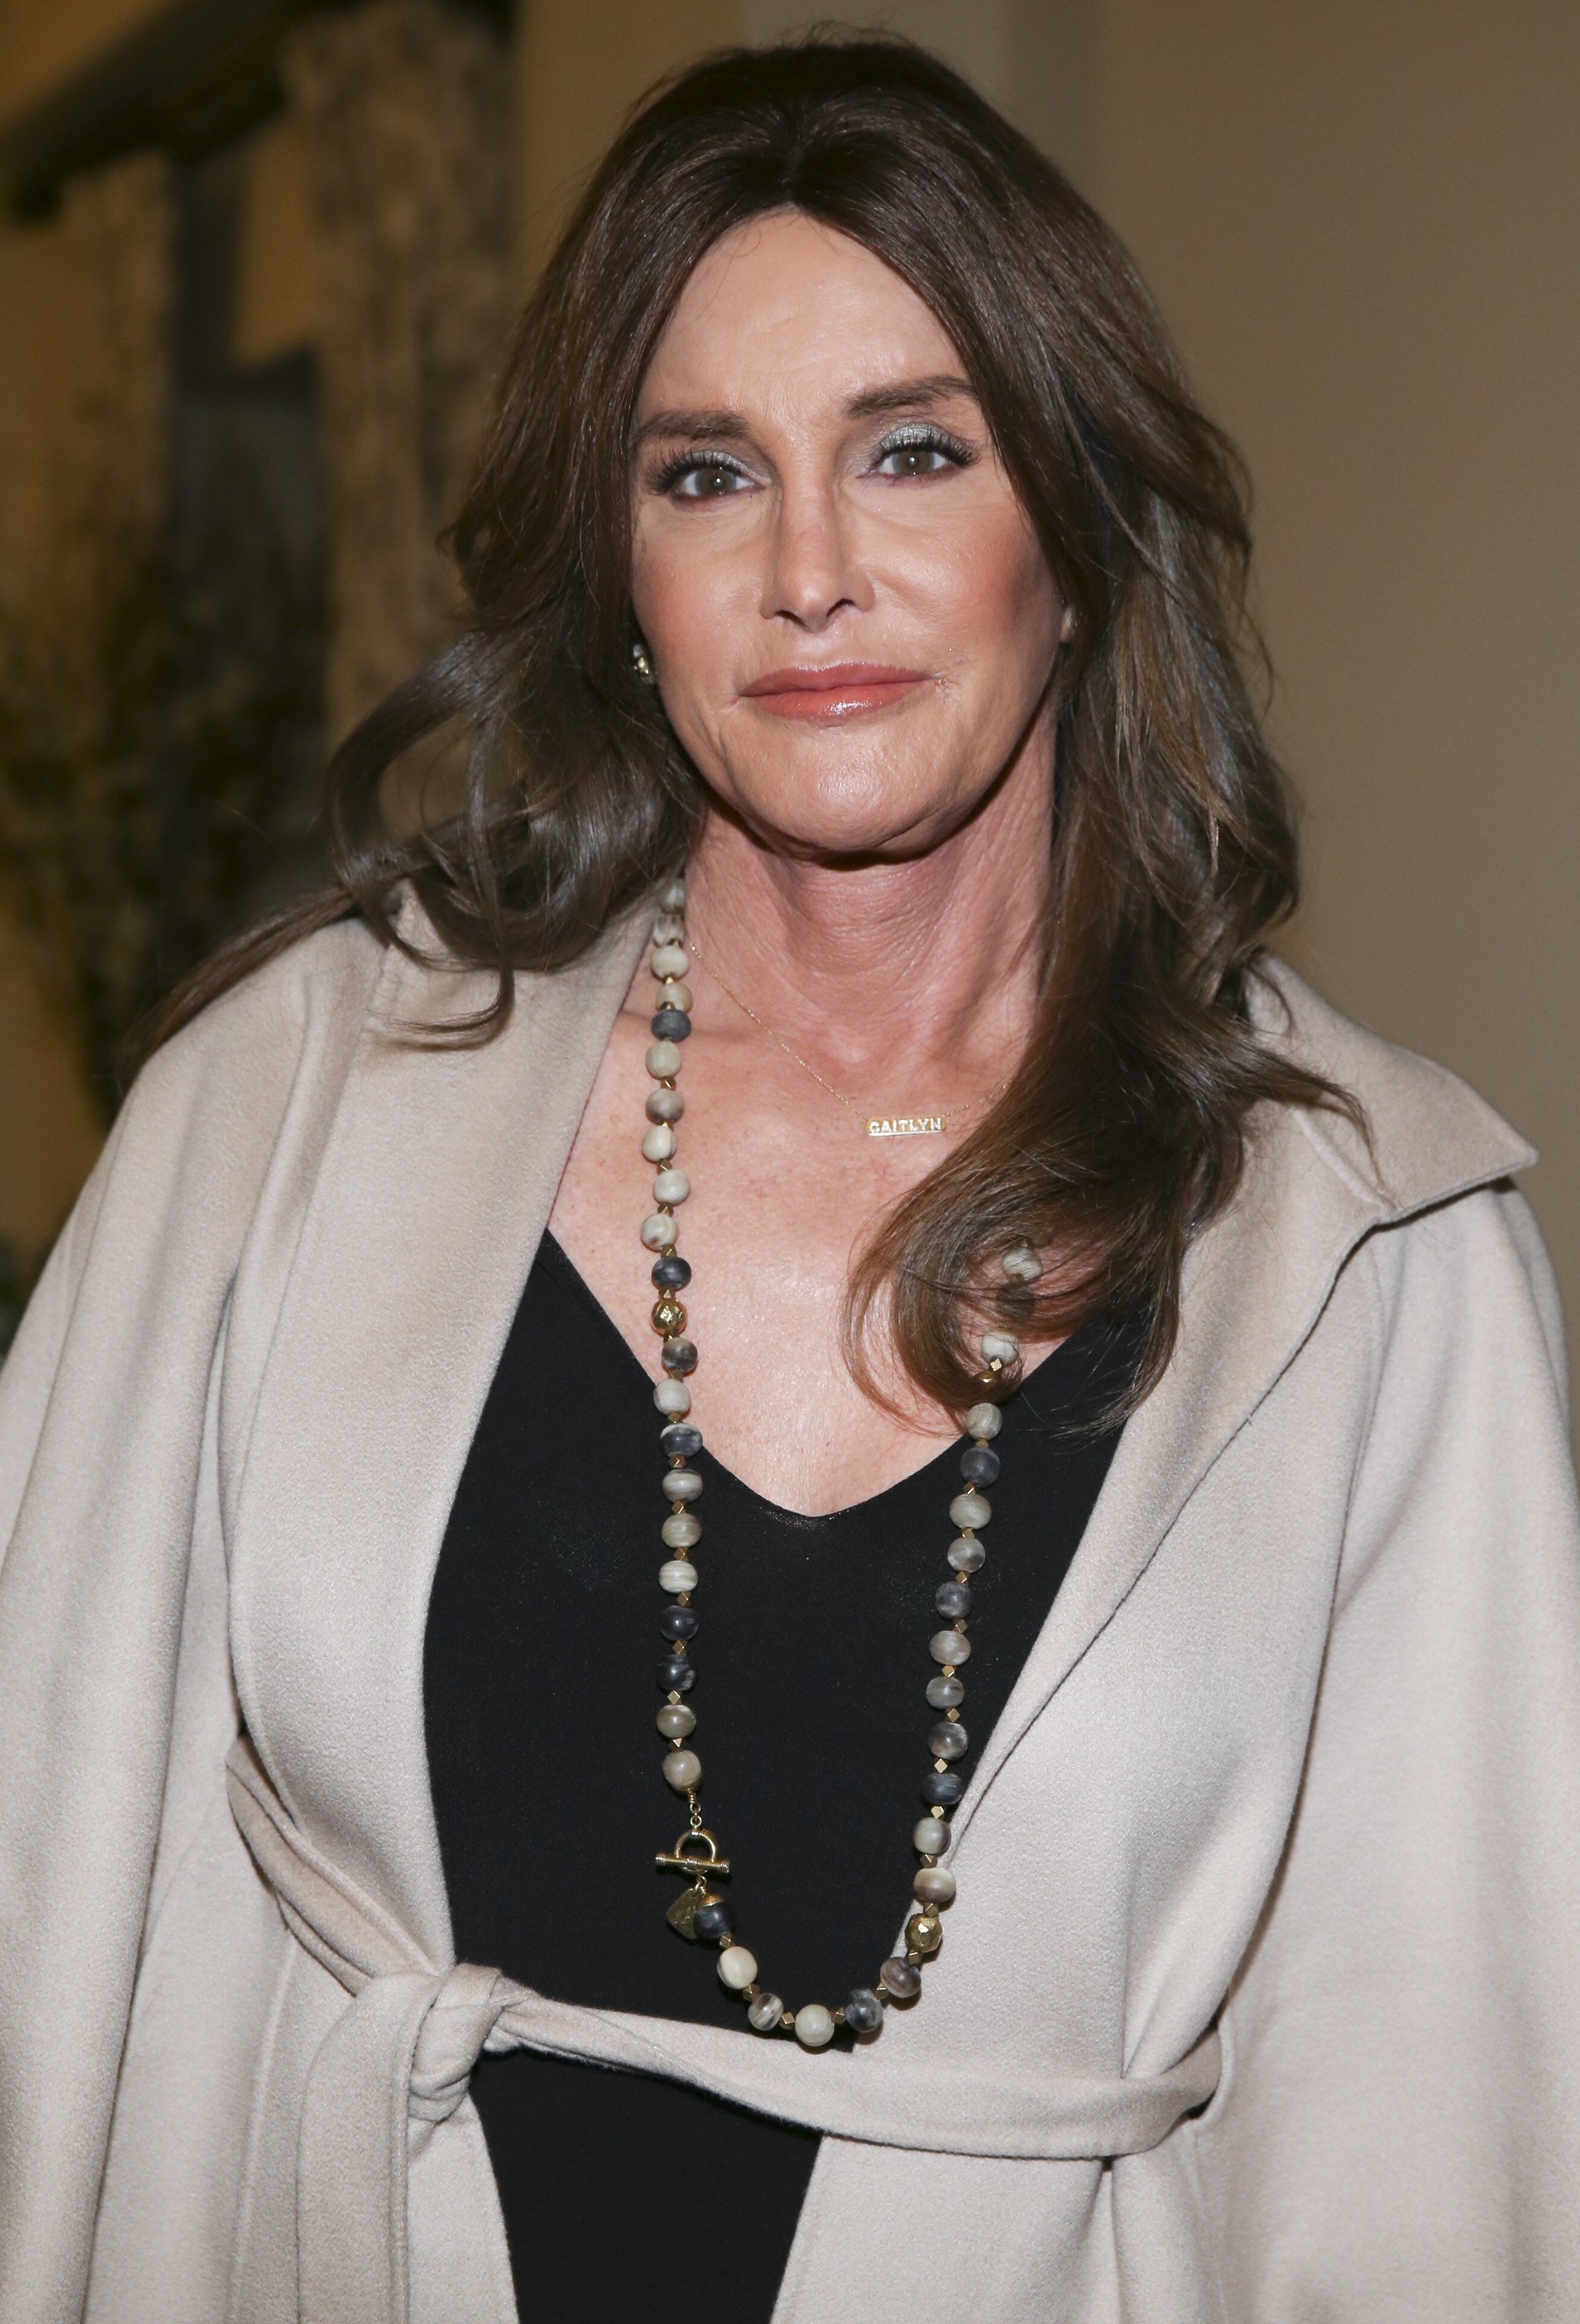 Caitlyn Jenner attending the 2016 "MAKERS Conference." | Photo: Getty Images